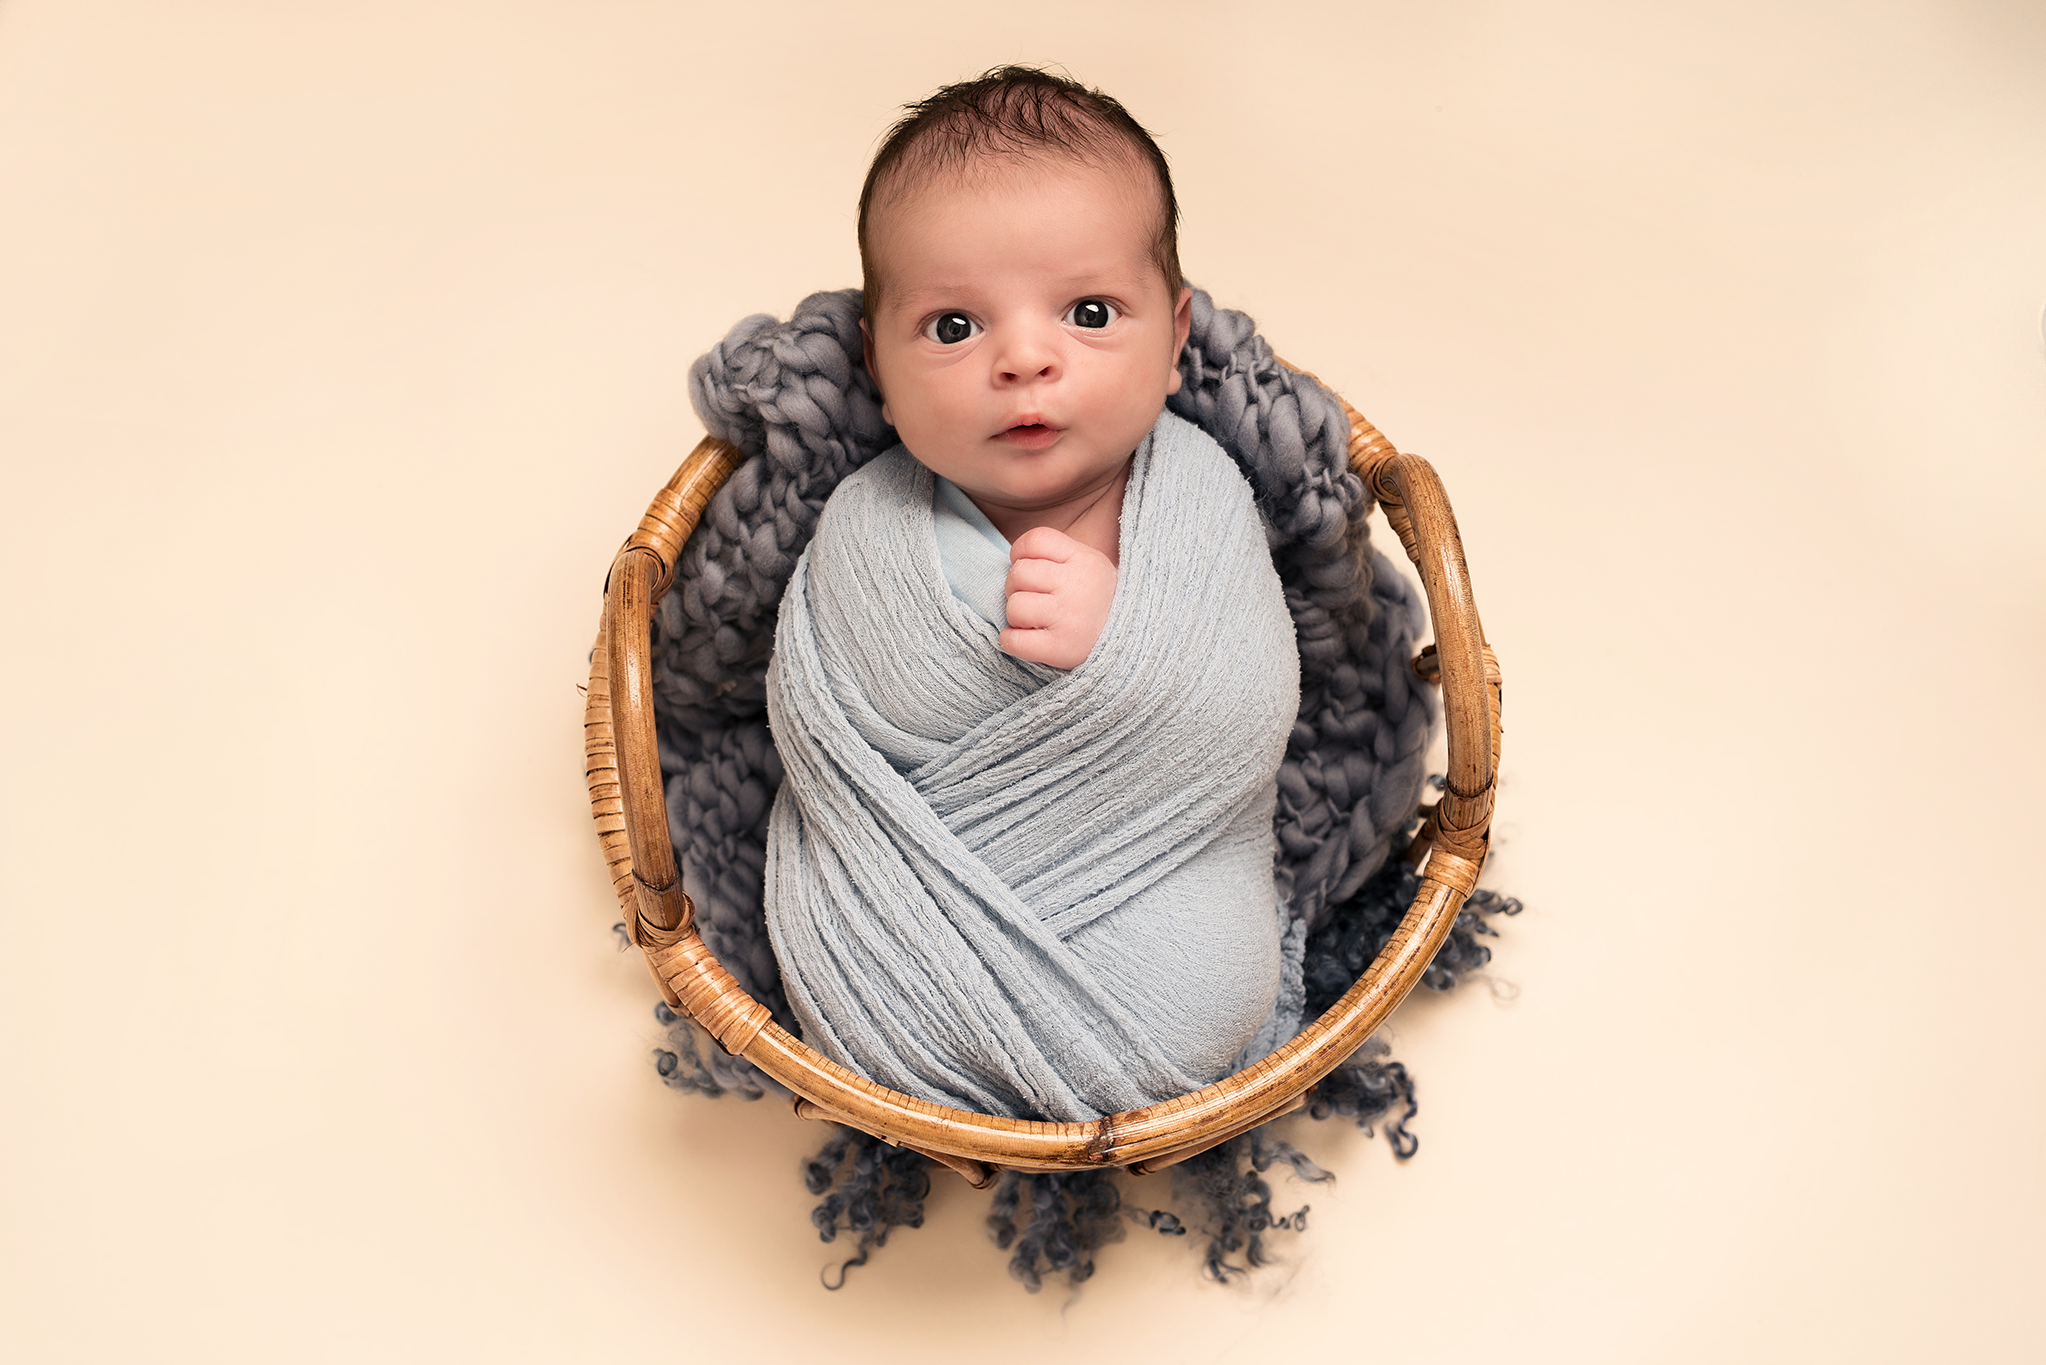 Baby boy in a basket taken by Alice James Photography in a newborn photoshoot, Hitchin